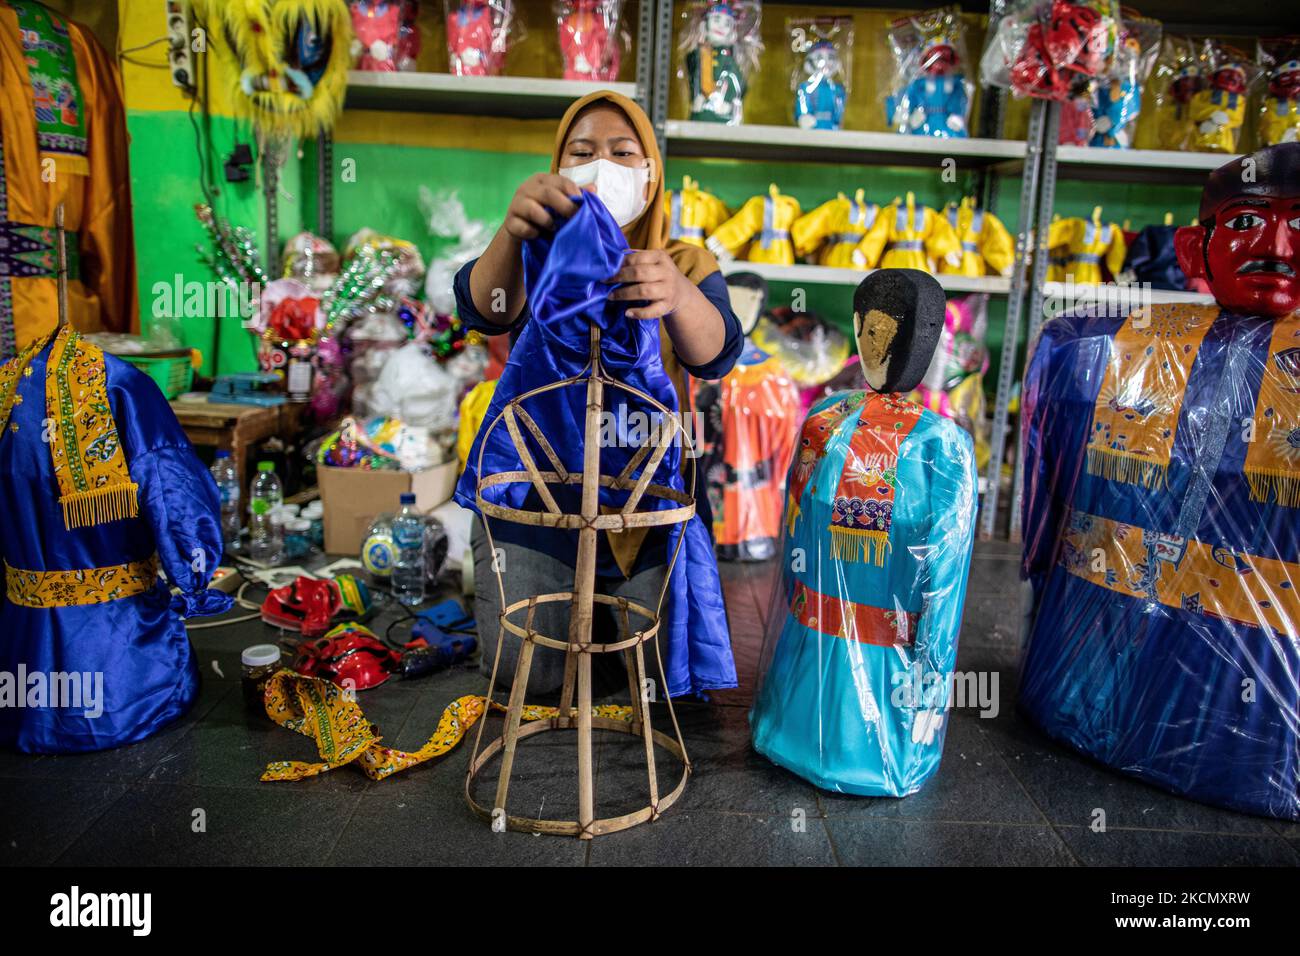 Manufacture and sale of Ondel-Ondel, a traditional Betawi-Jakarta doll toy. After the decline in COVID-19 cases in Jakarta, the tourism sector began to revive, one of which is the ondel-ondel producer and seller in Jagakarsa, sales increased by 20%. (Photo by Donal Husni/NurPhoto) Stock Photo